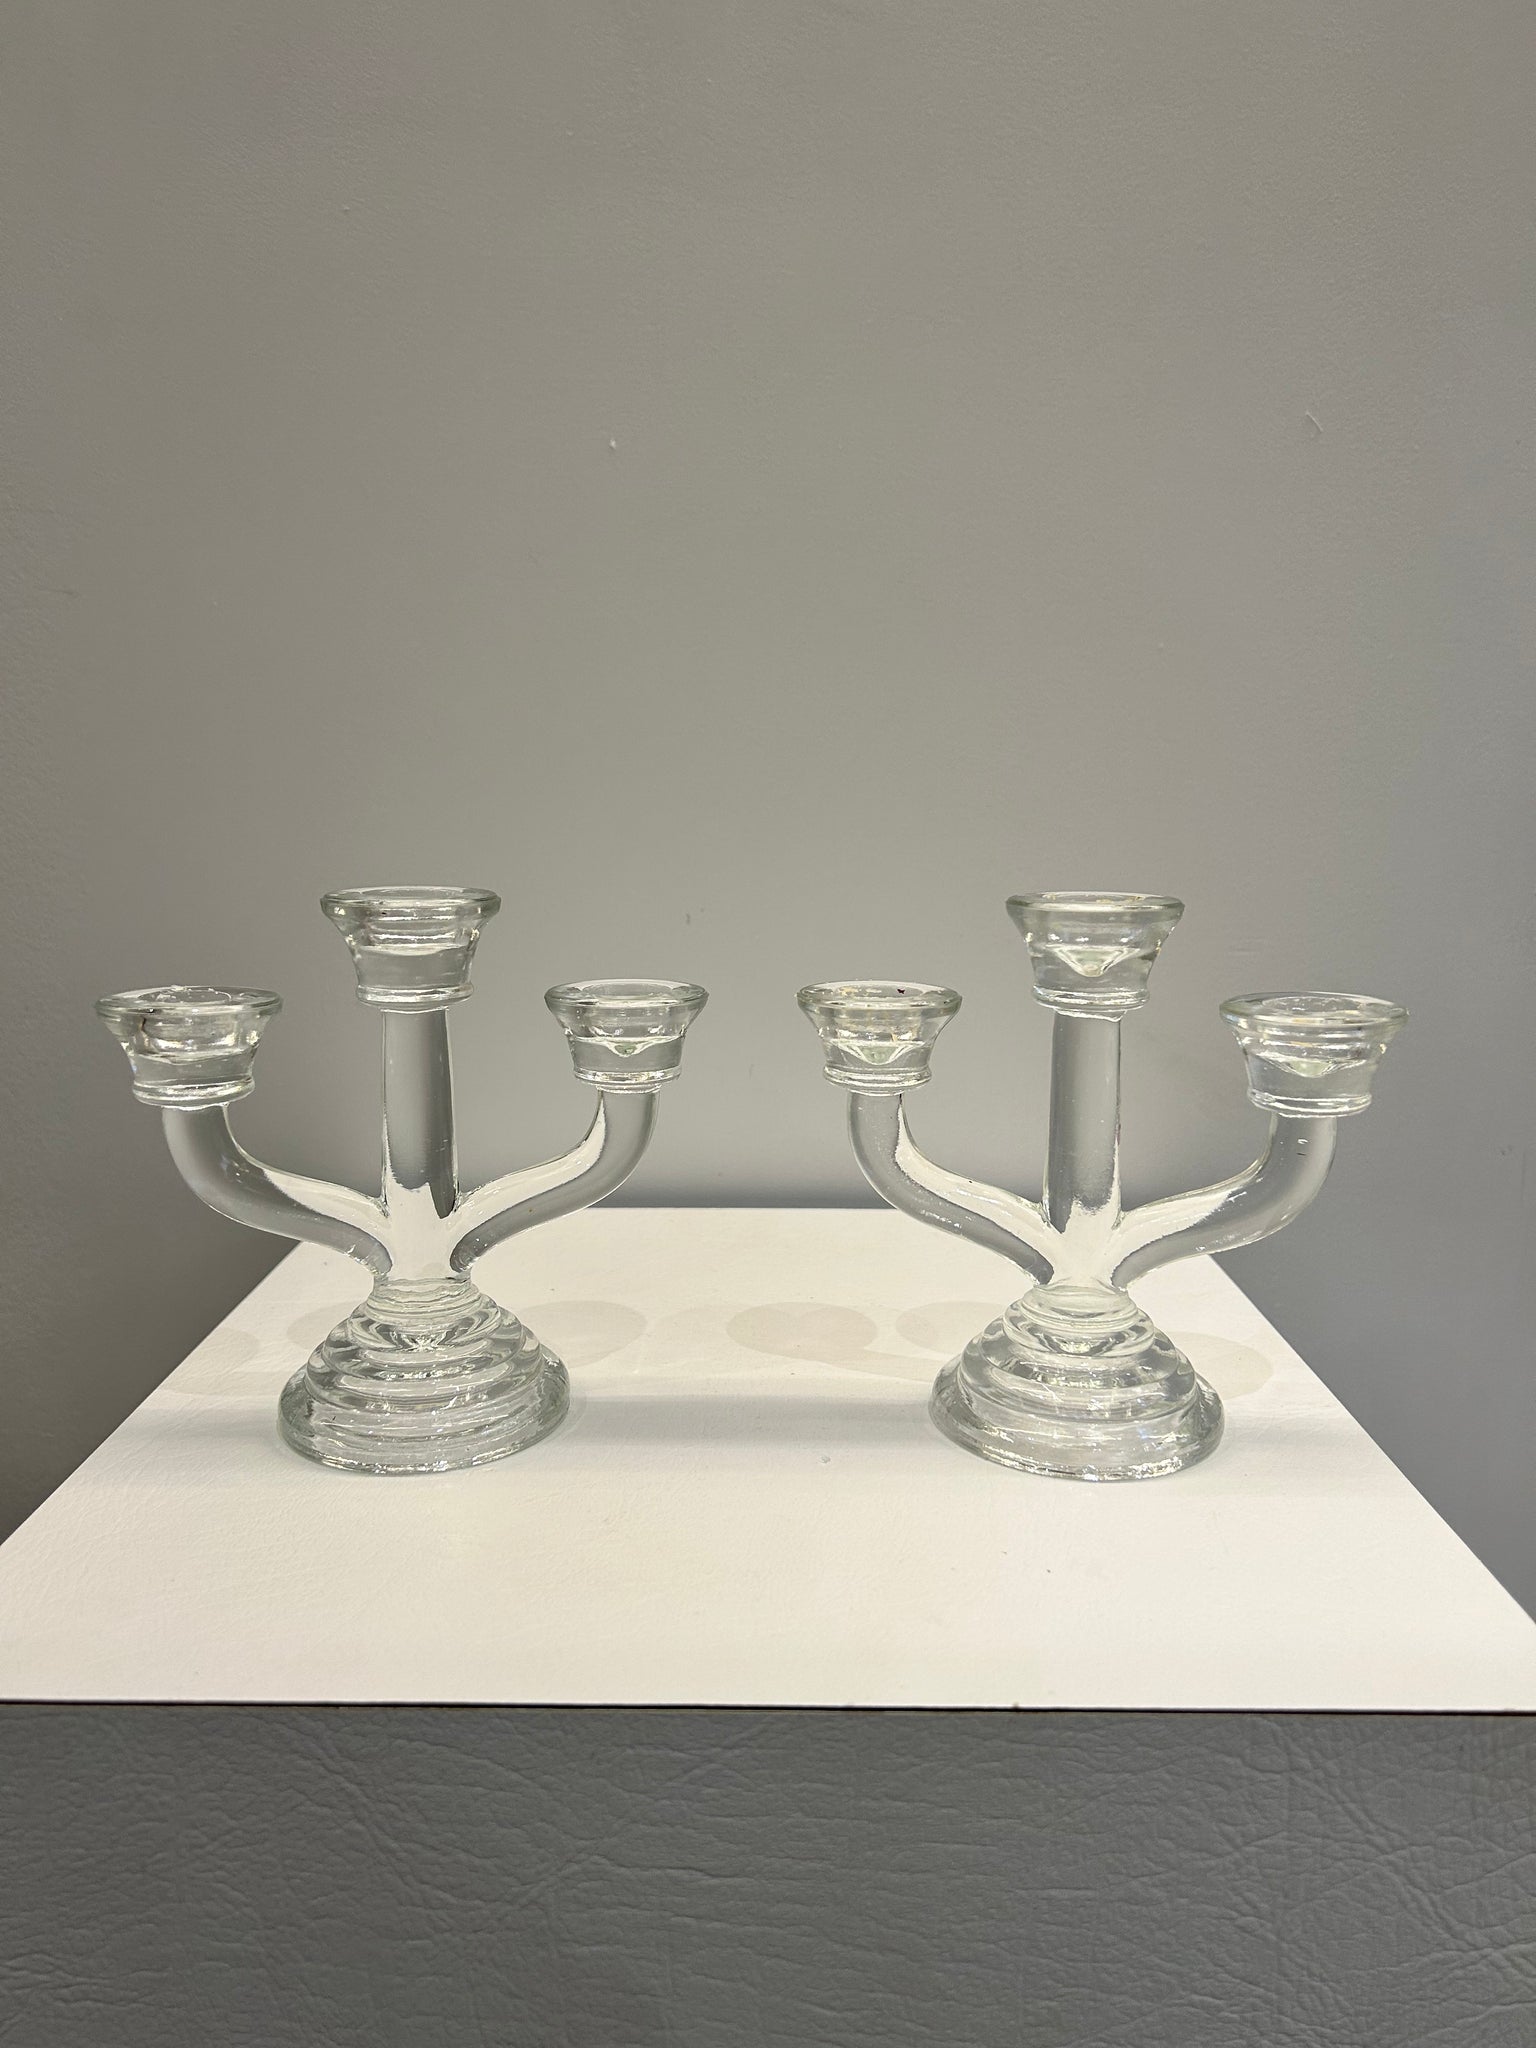 Three headed glass candle holders